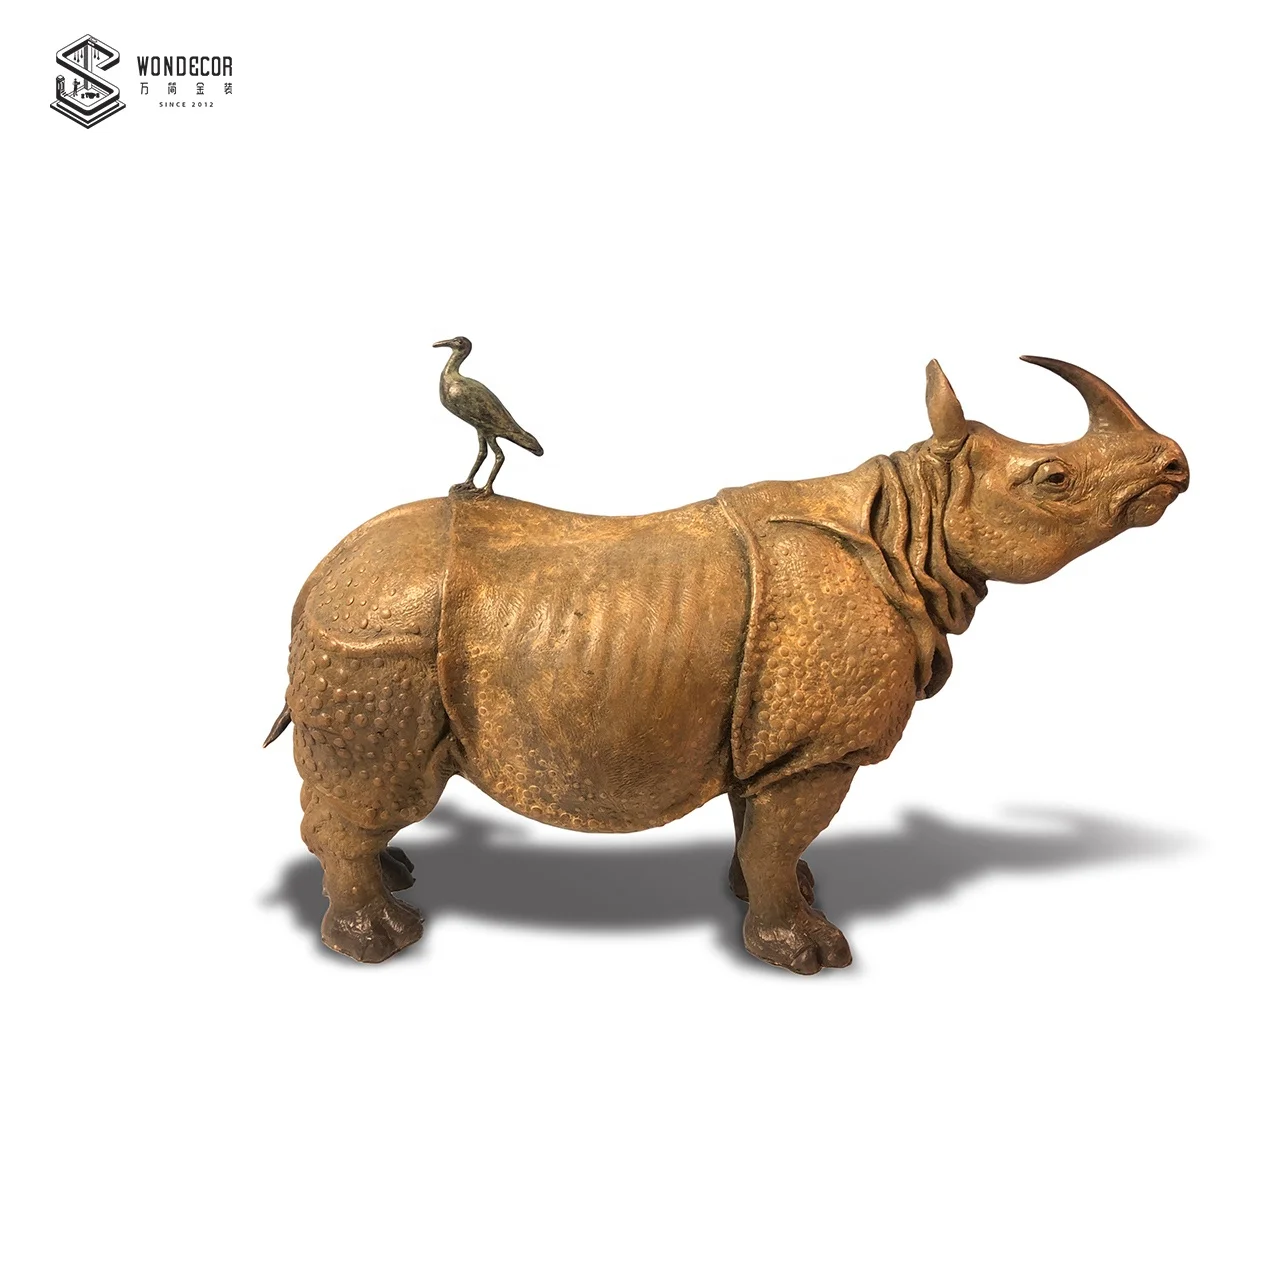 China factory supplied top quality Bronze Sculpture rhinoceros with a bird statue